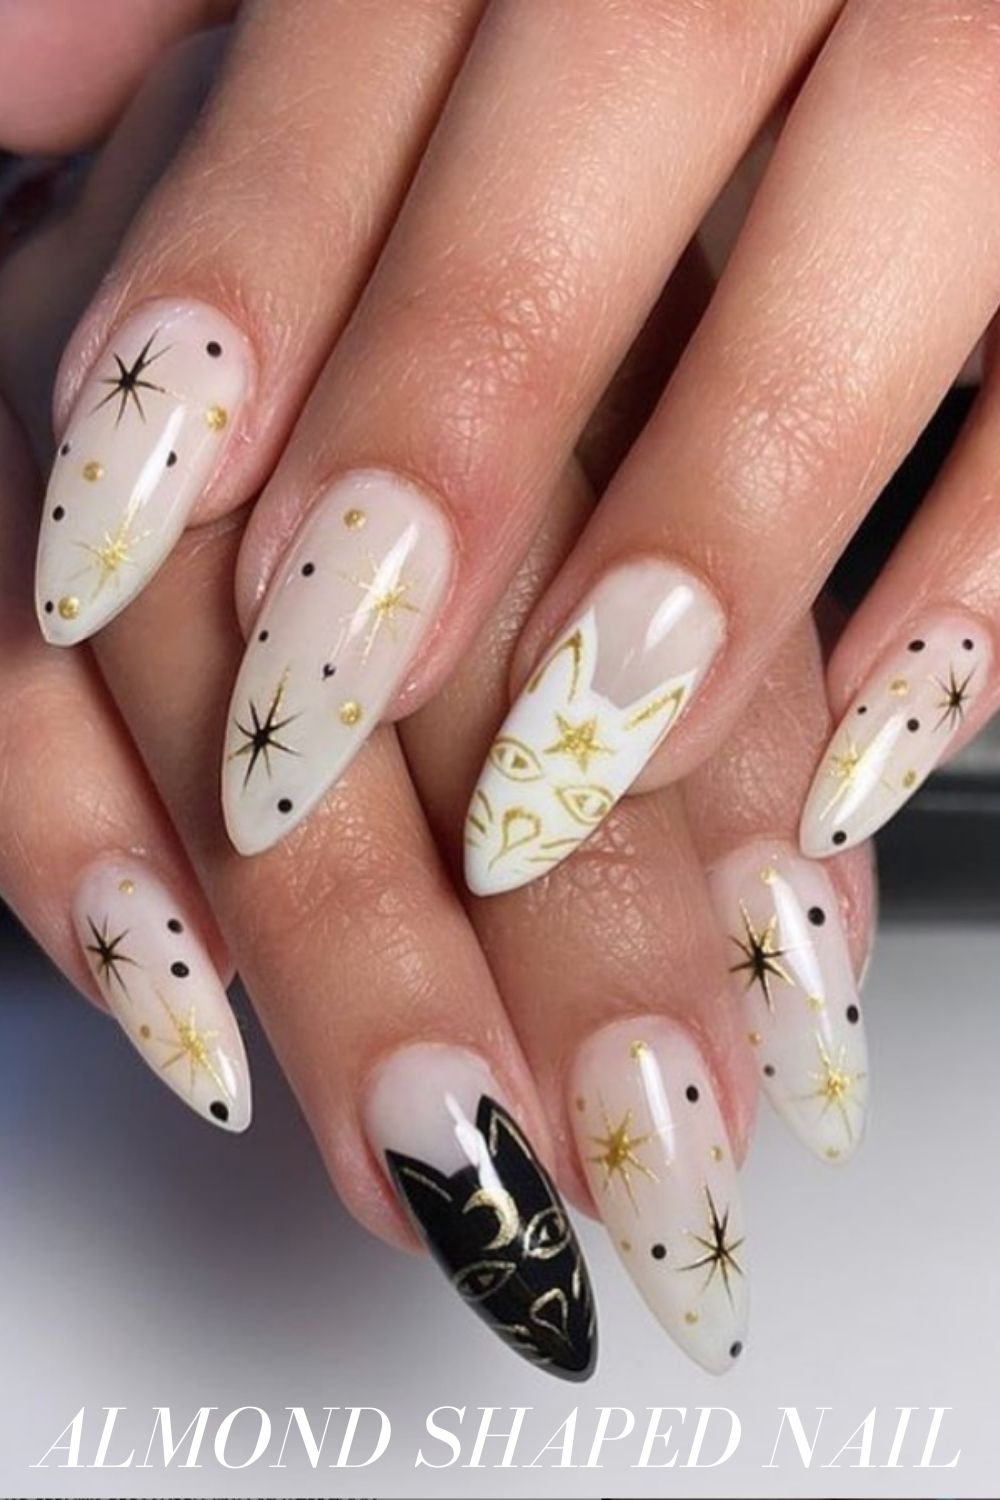 White and black almond nails designs